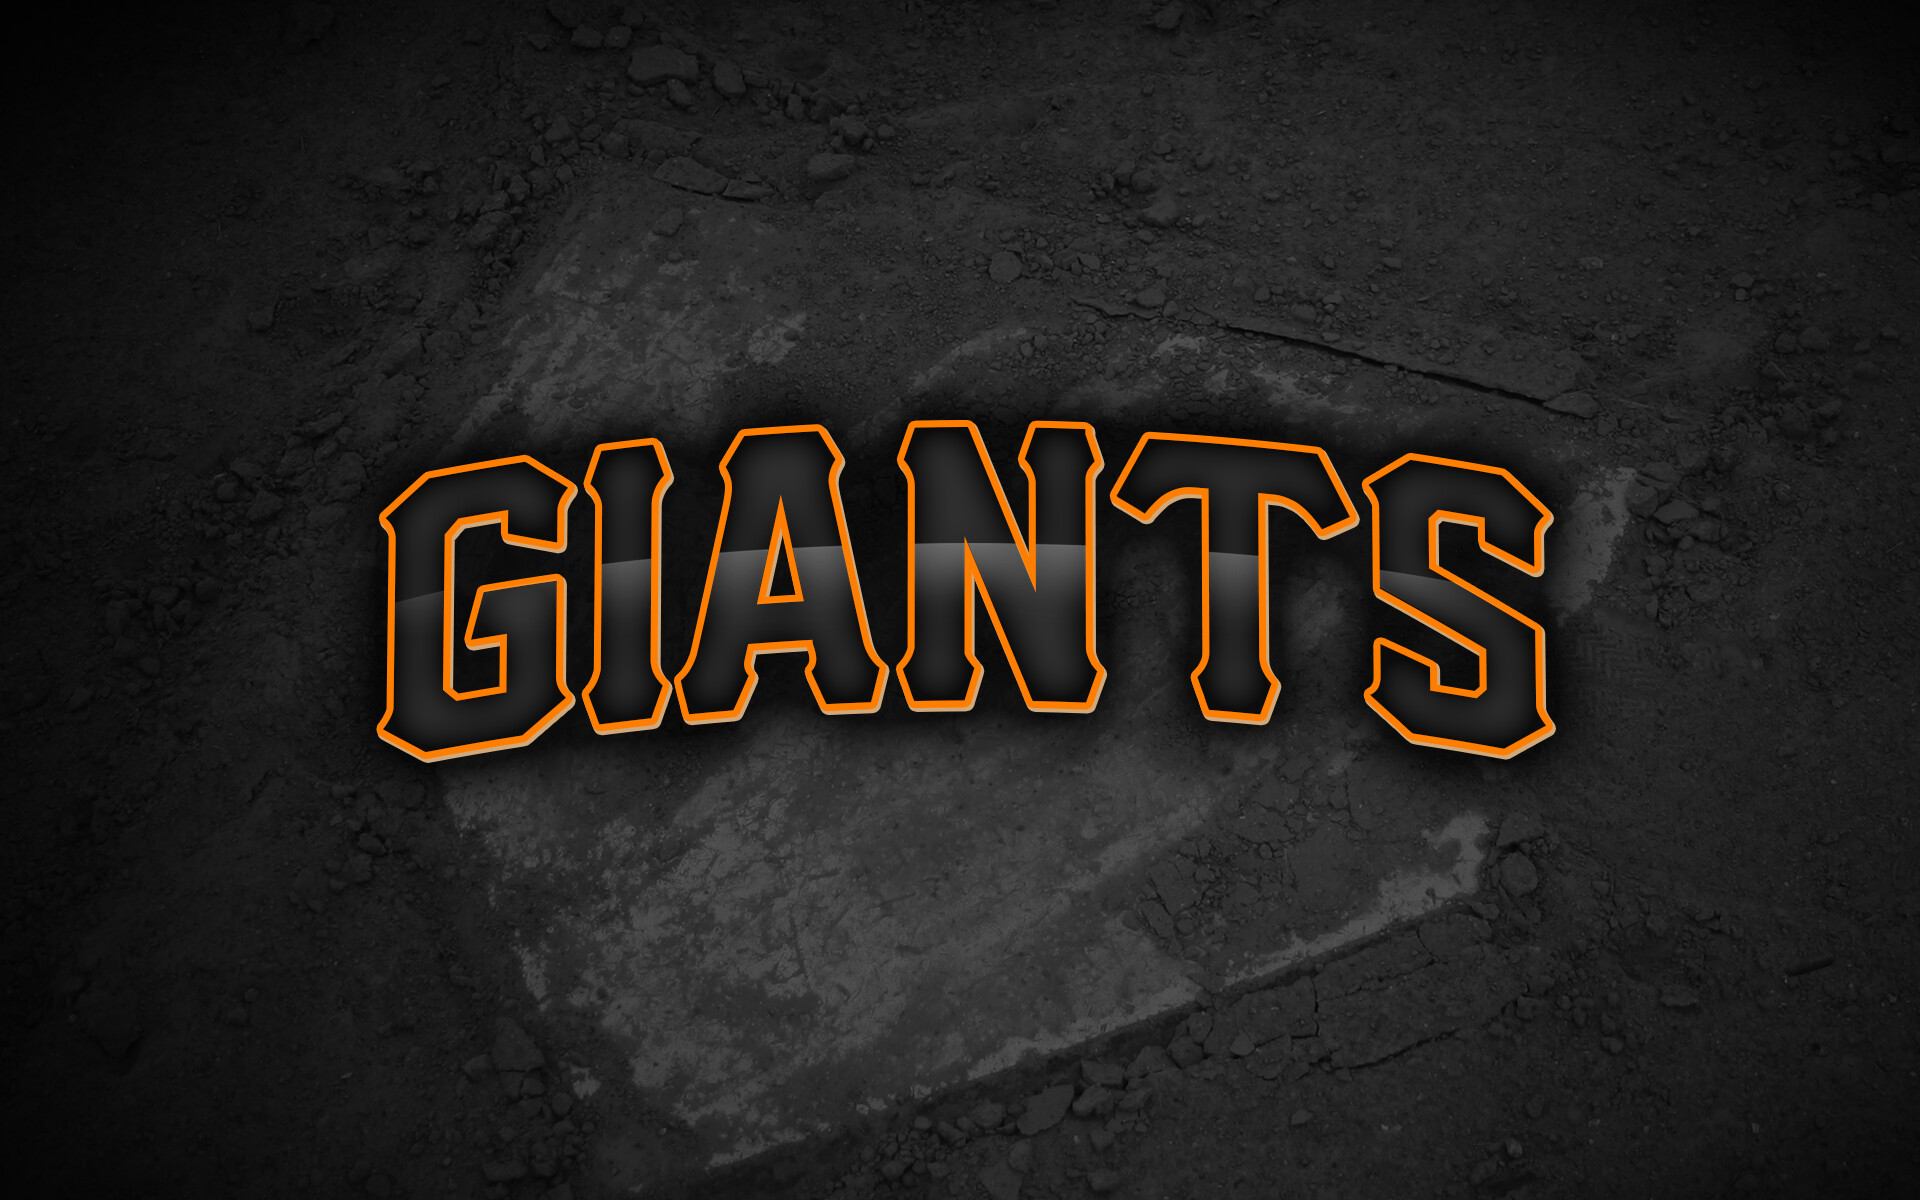 San Francisco Giants: Five-time World Series championships winners, The Baseball Hall of Fame members. 1920x1200 HD Background.